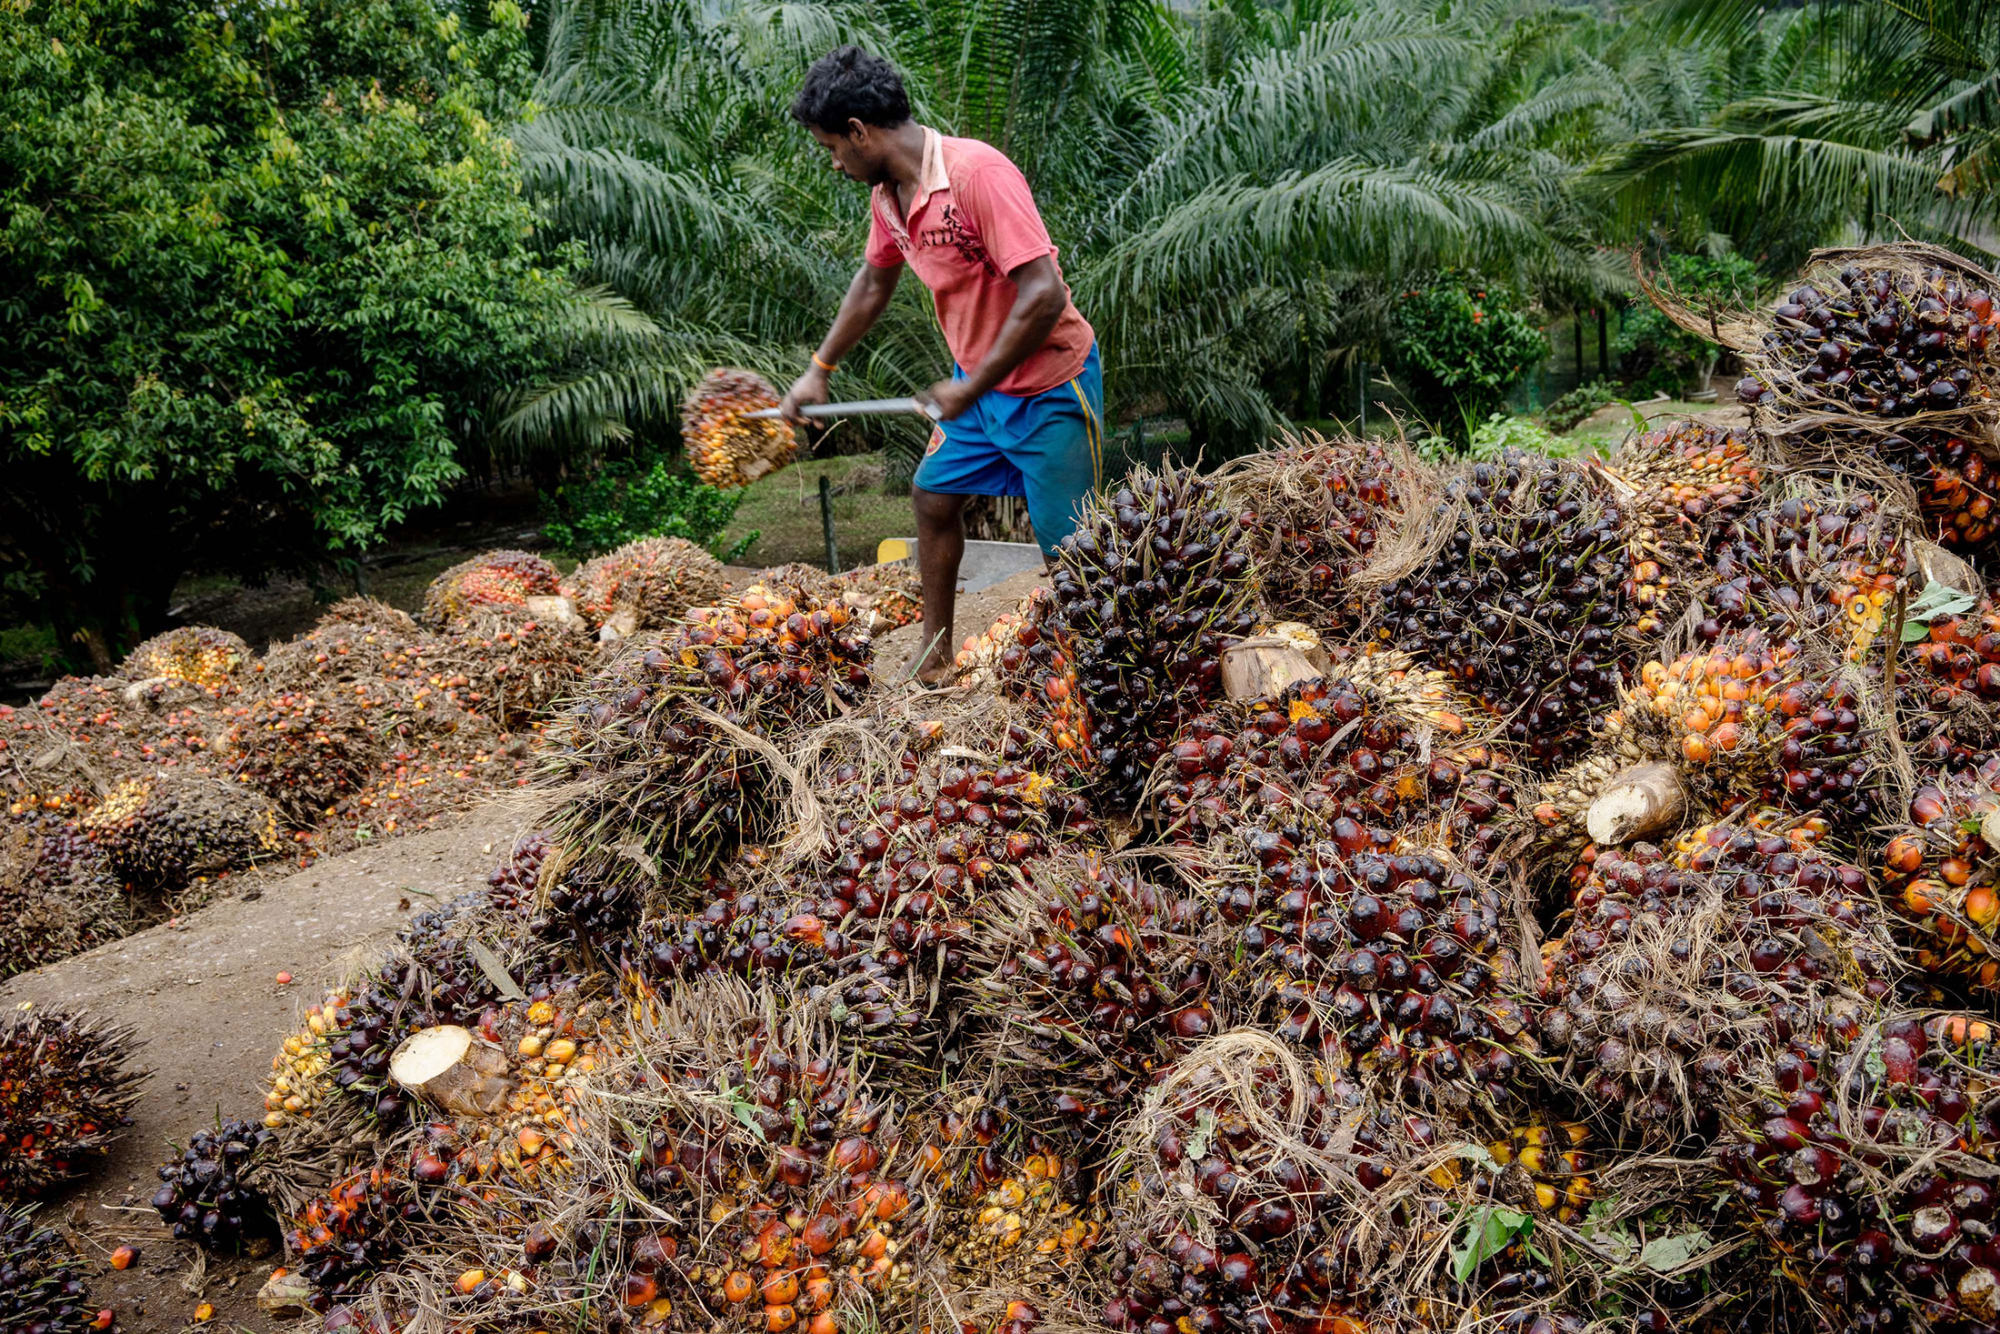 A worker loads palm fruit onto the back of a truck at a palm oil plantation in Malaysia.
